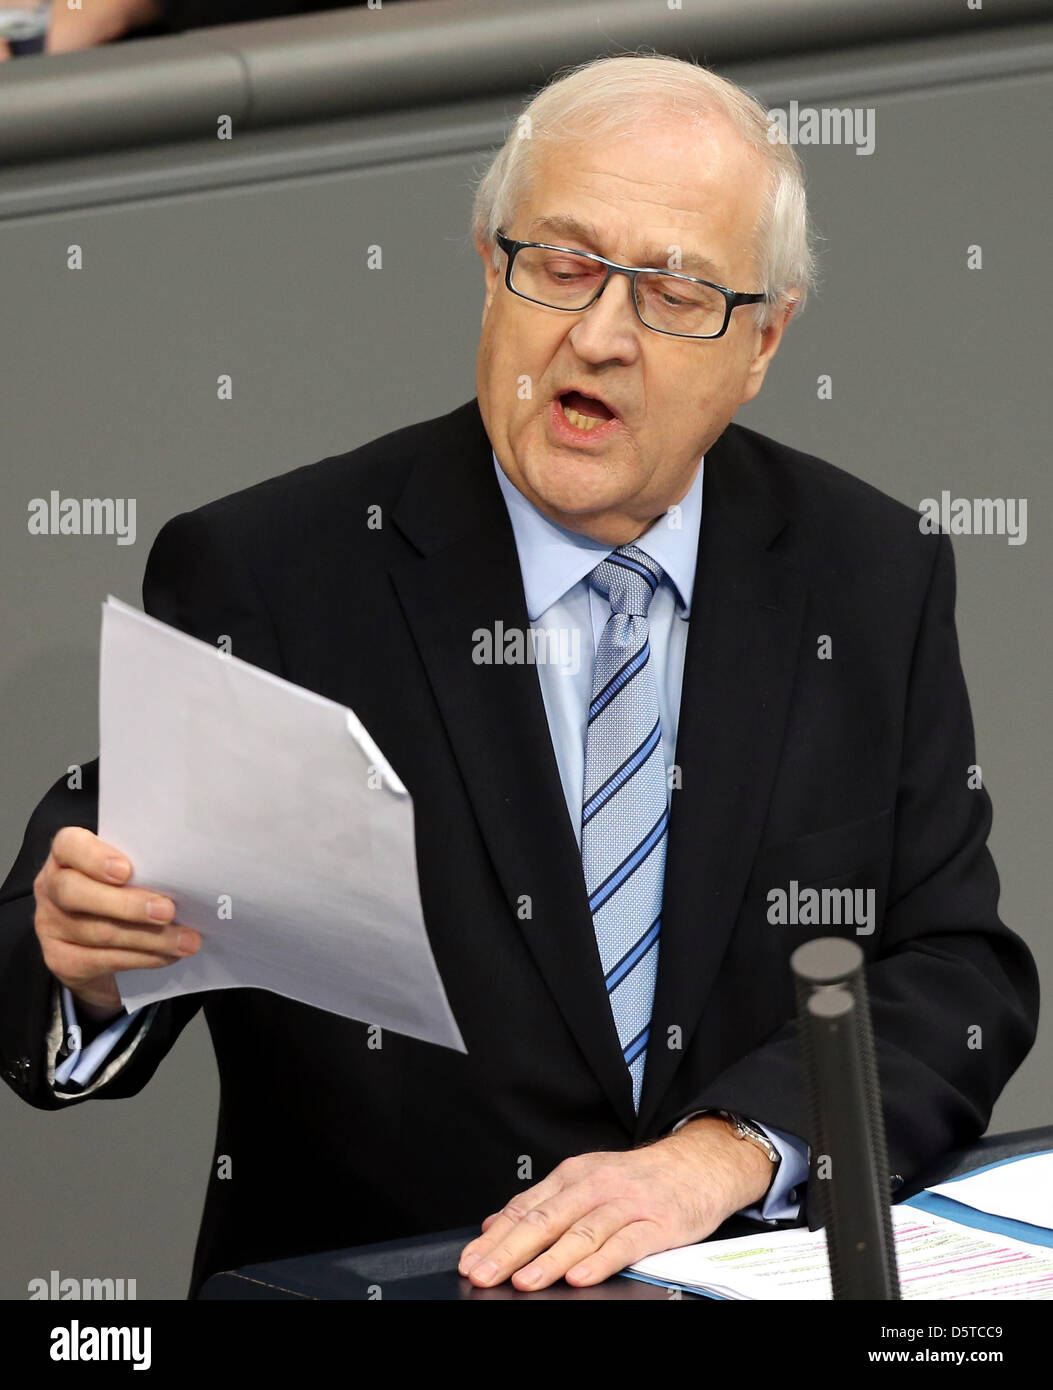 Chairman of the FDP parliamentary group Rainer Bruederle delivers a speech during the weekly cabinet meeting at the German Bundestag in Berlin, Germany, 21 November 2012. The German parliament consults on the federal budget 2013. Photo: WOLFGANG KUMM Stock Photo